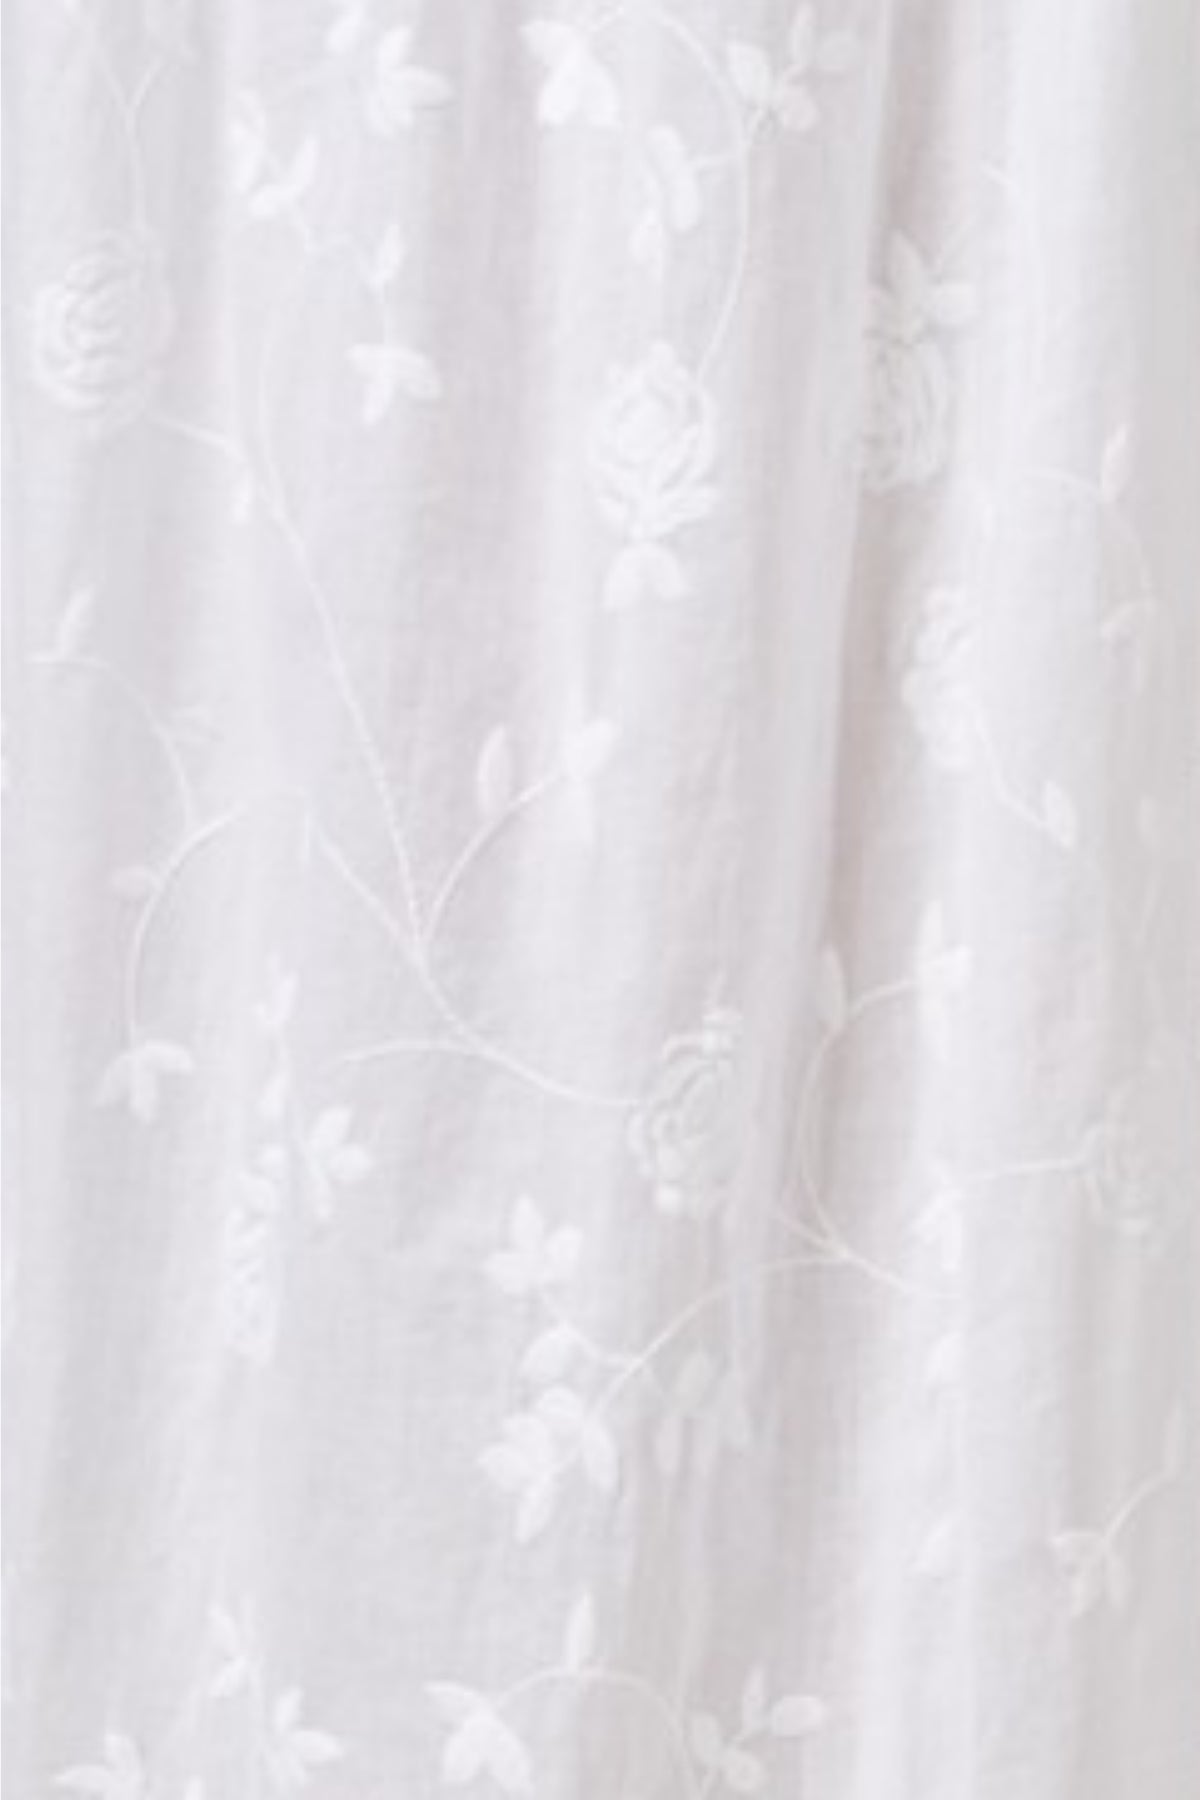 Charter Club Intimates Bright-White Lace-Trim Embroidered Night-Gown